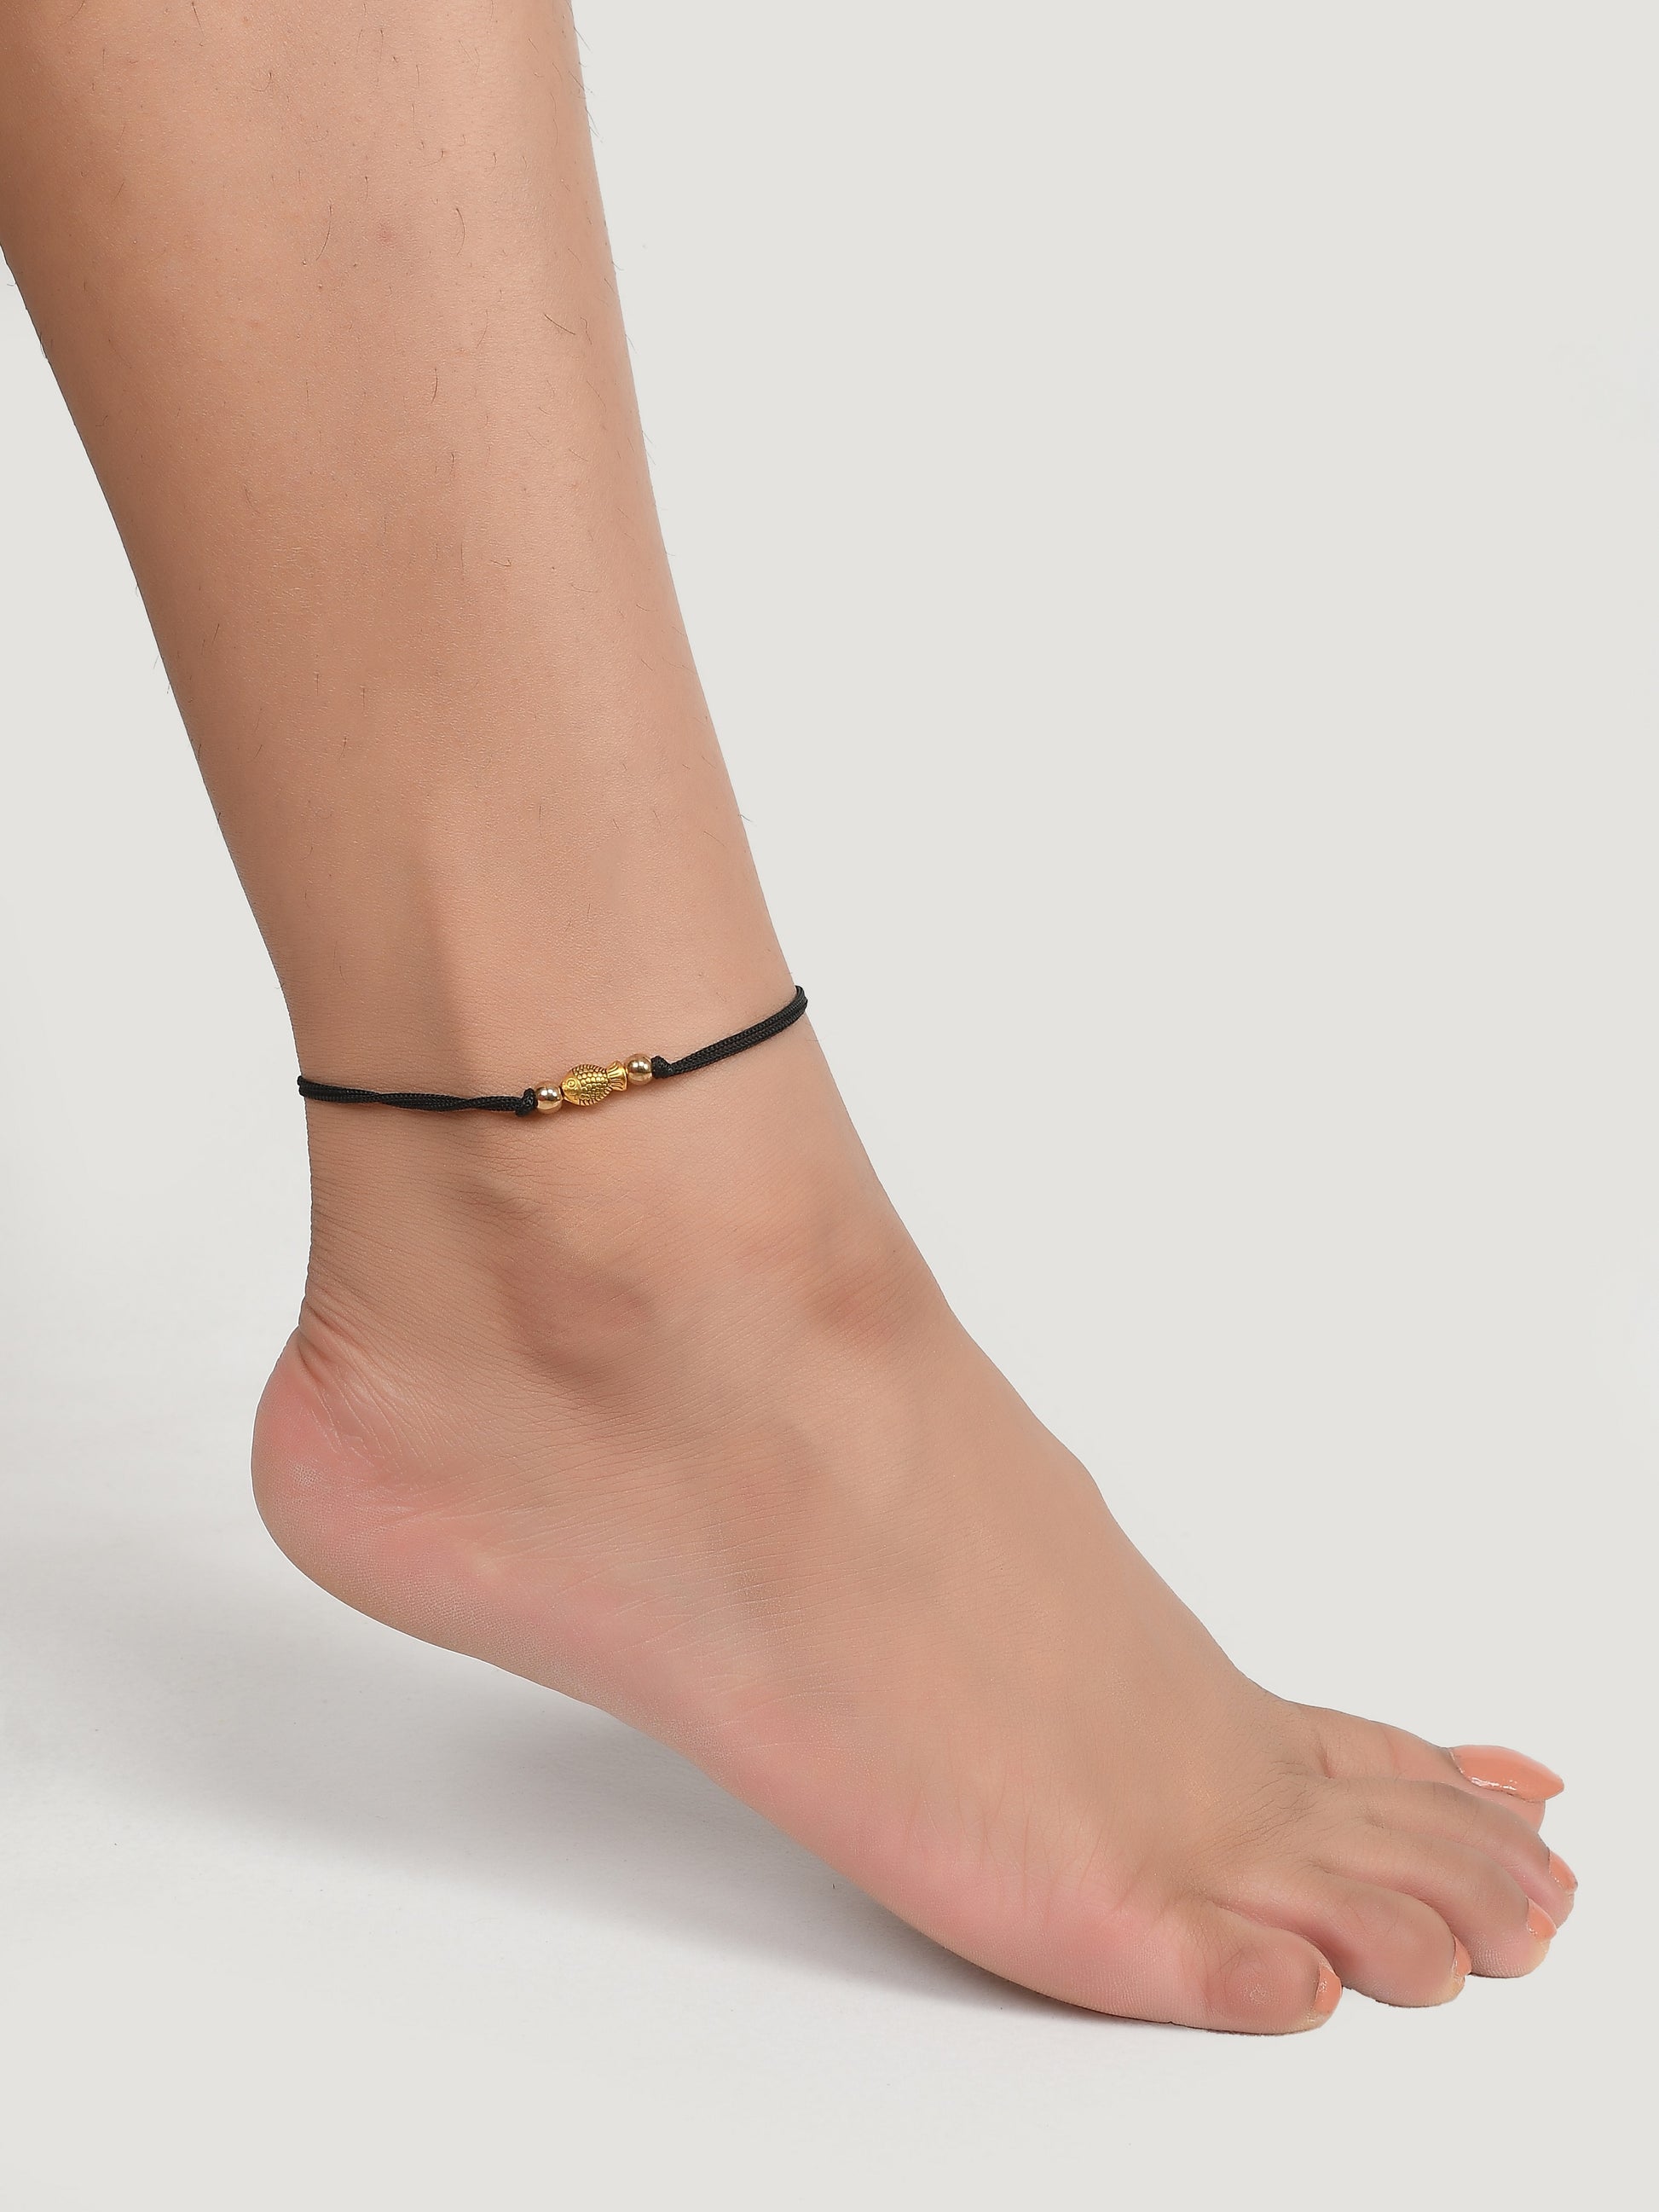 Gold Fish Charm Beads Black Thread Anklet